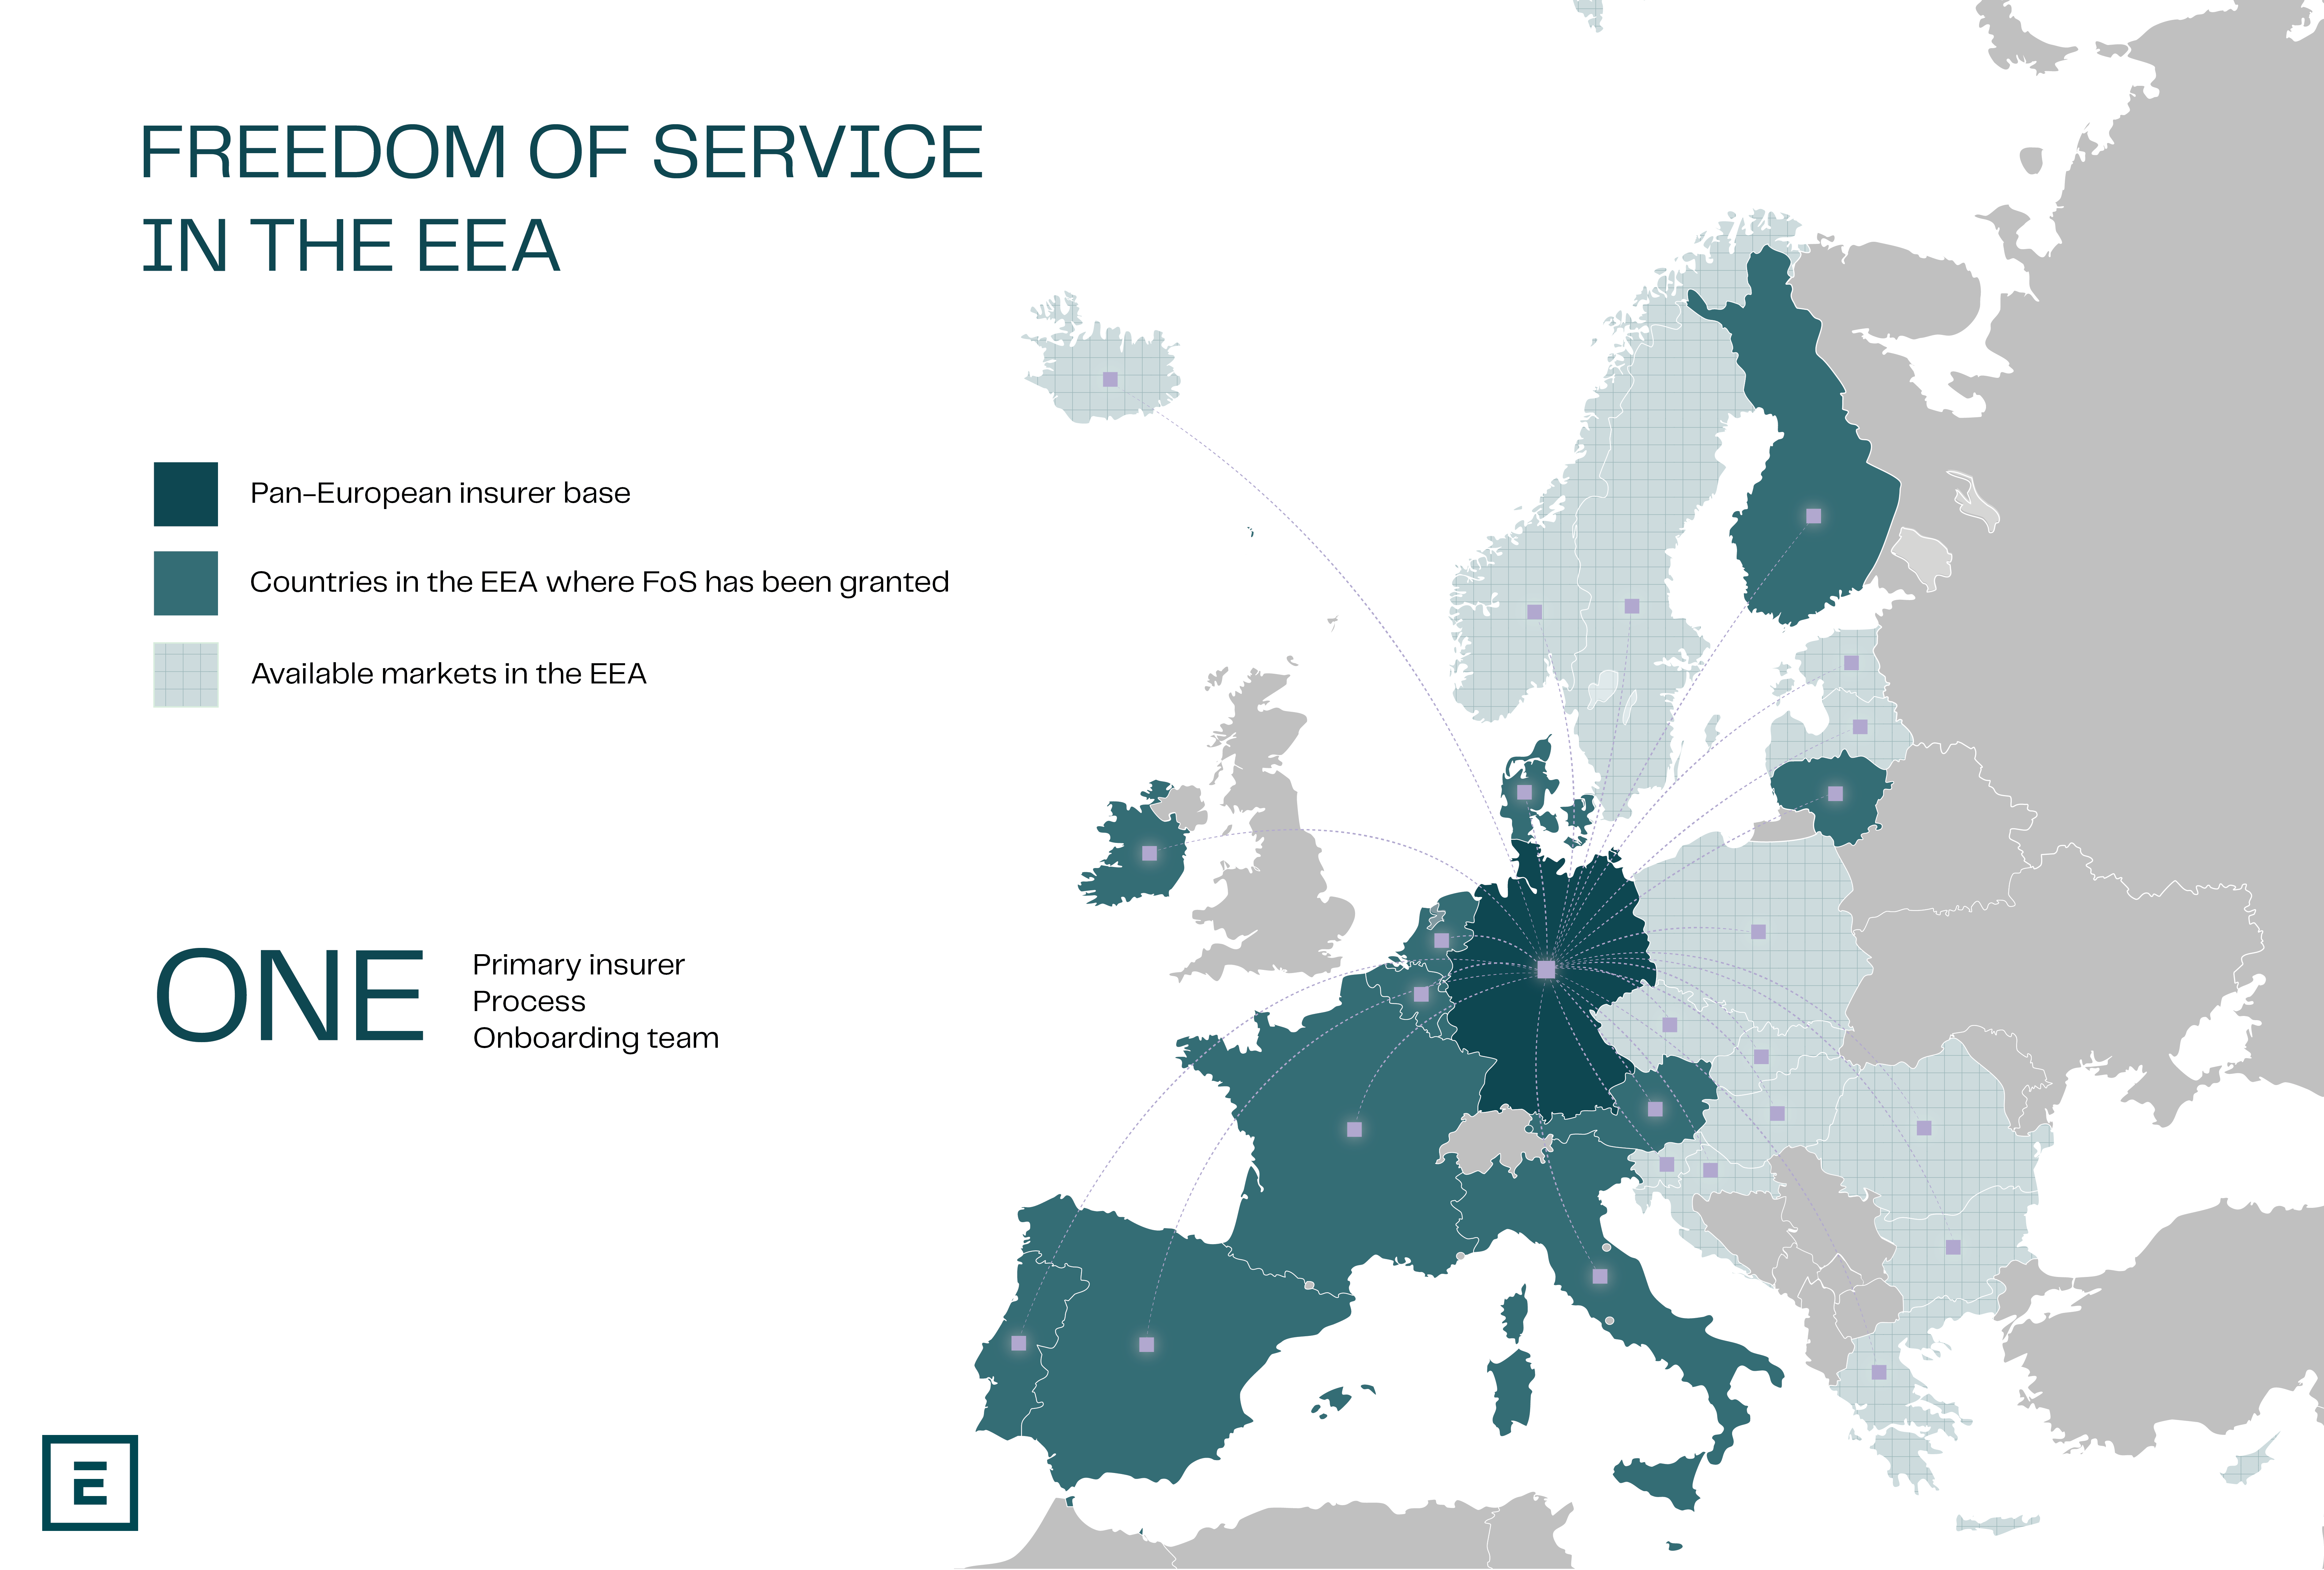 Freedom of Service in the EEA